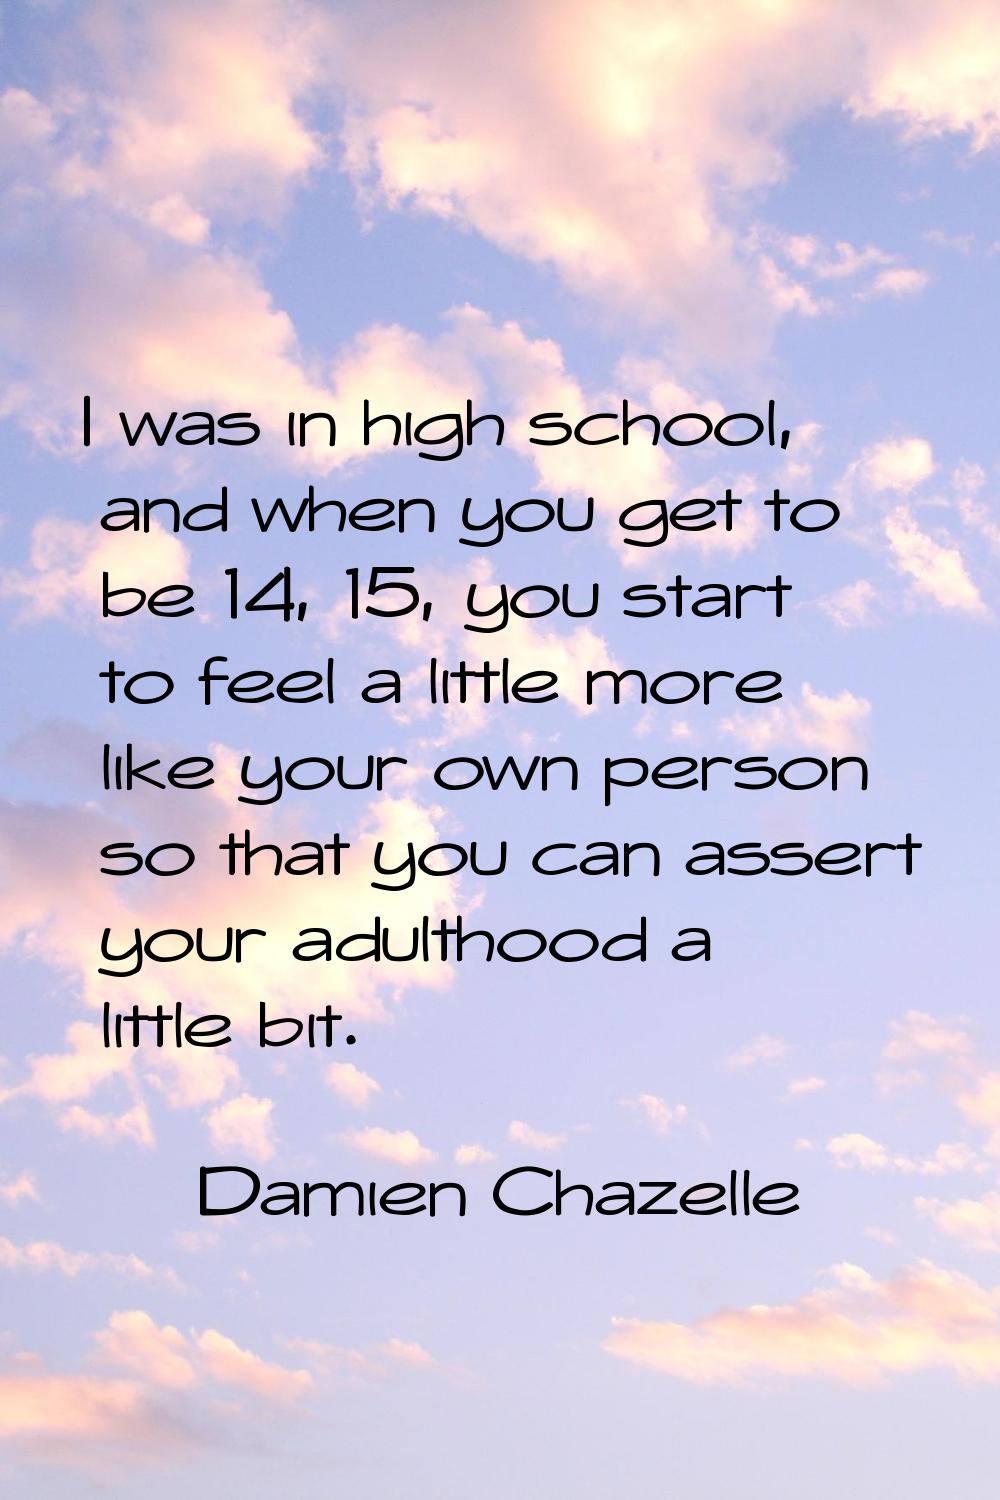 I was in high school, and when you get to be 14, 15, you start to feel a little more like your own 